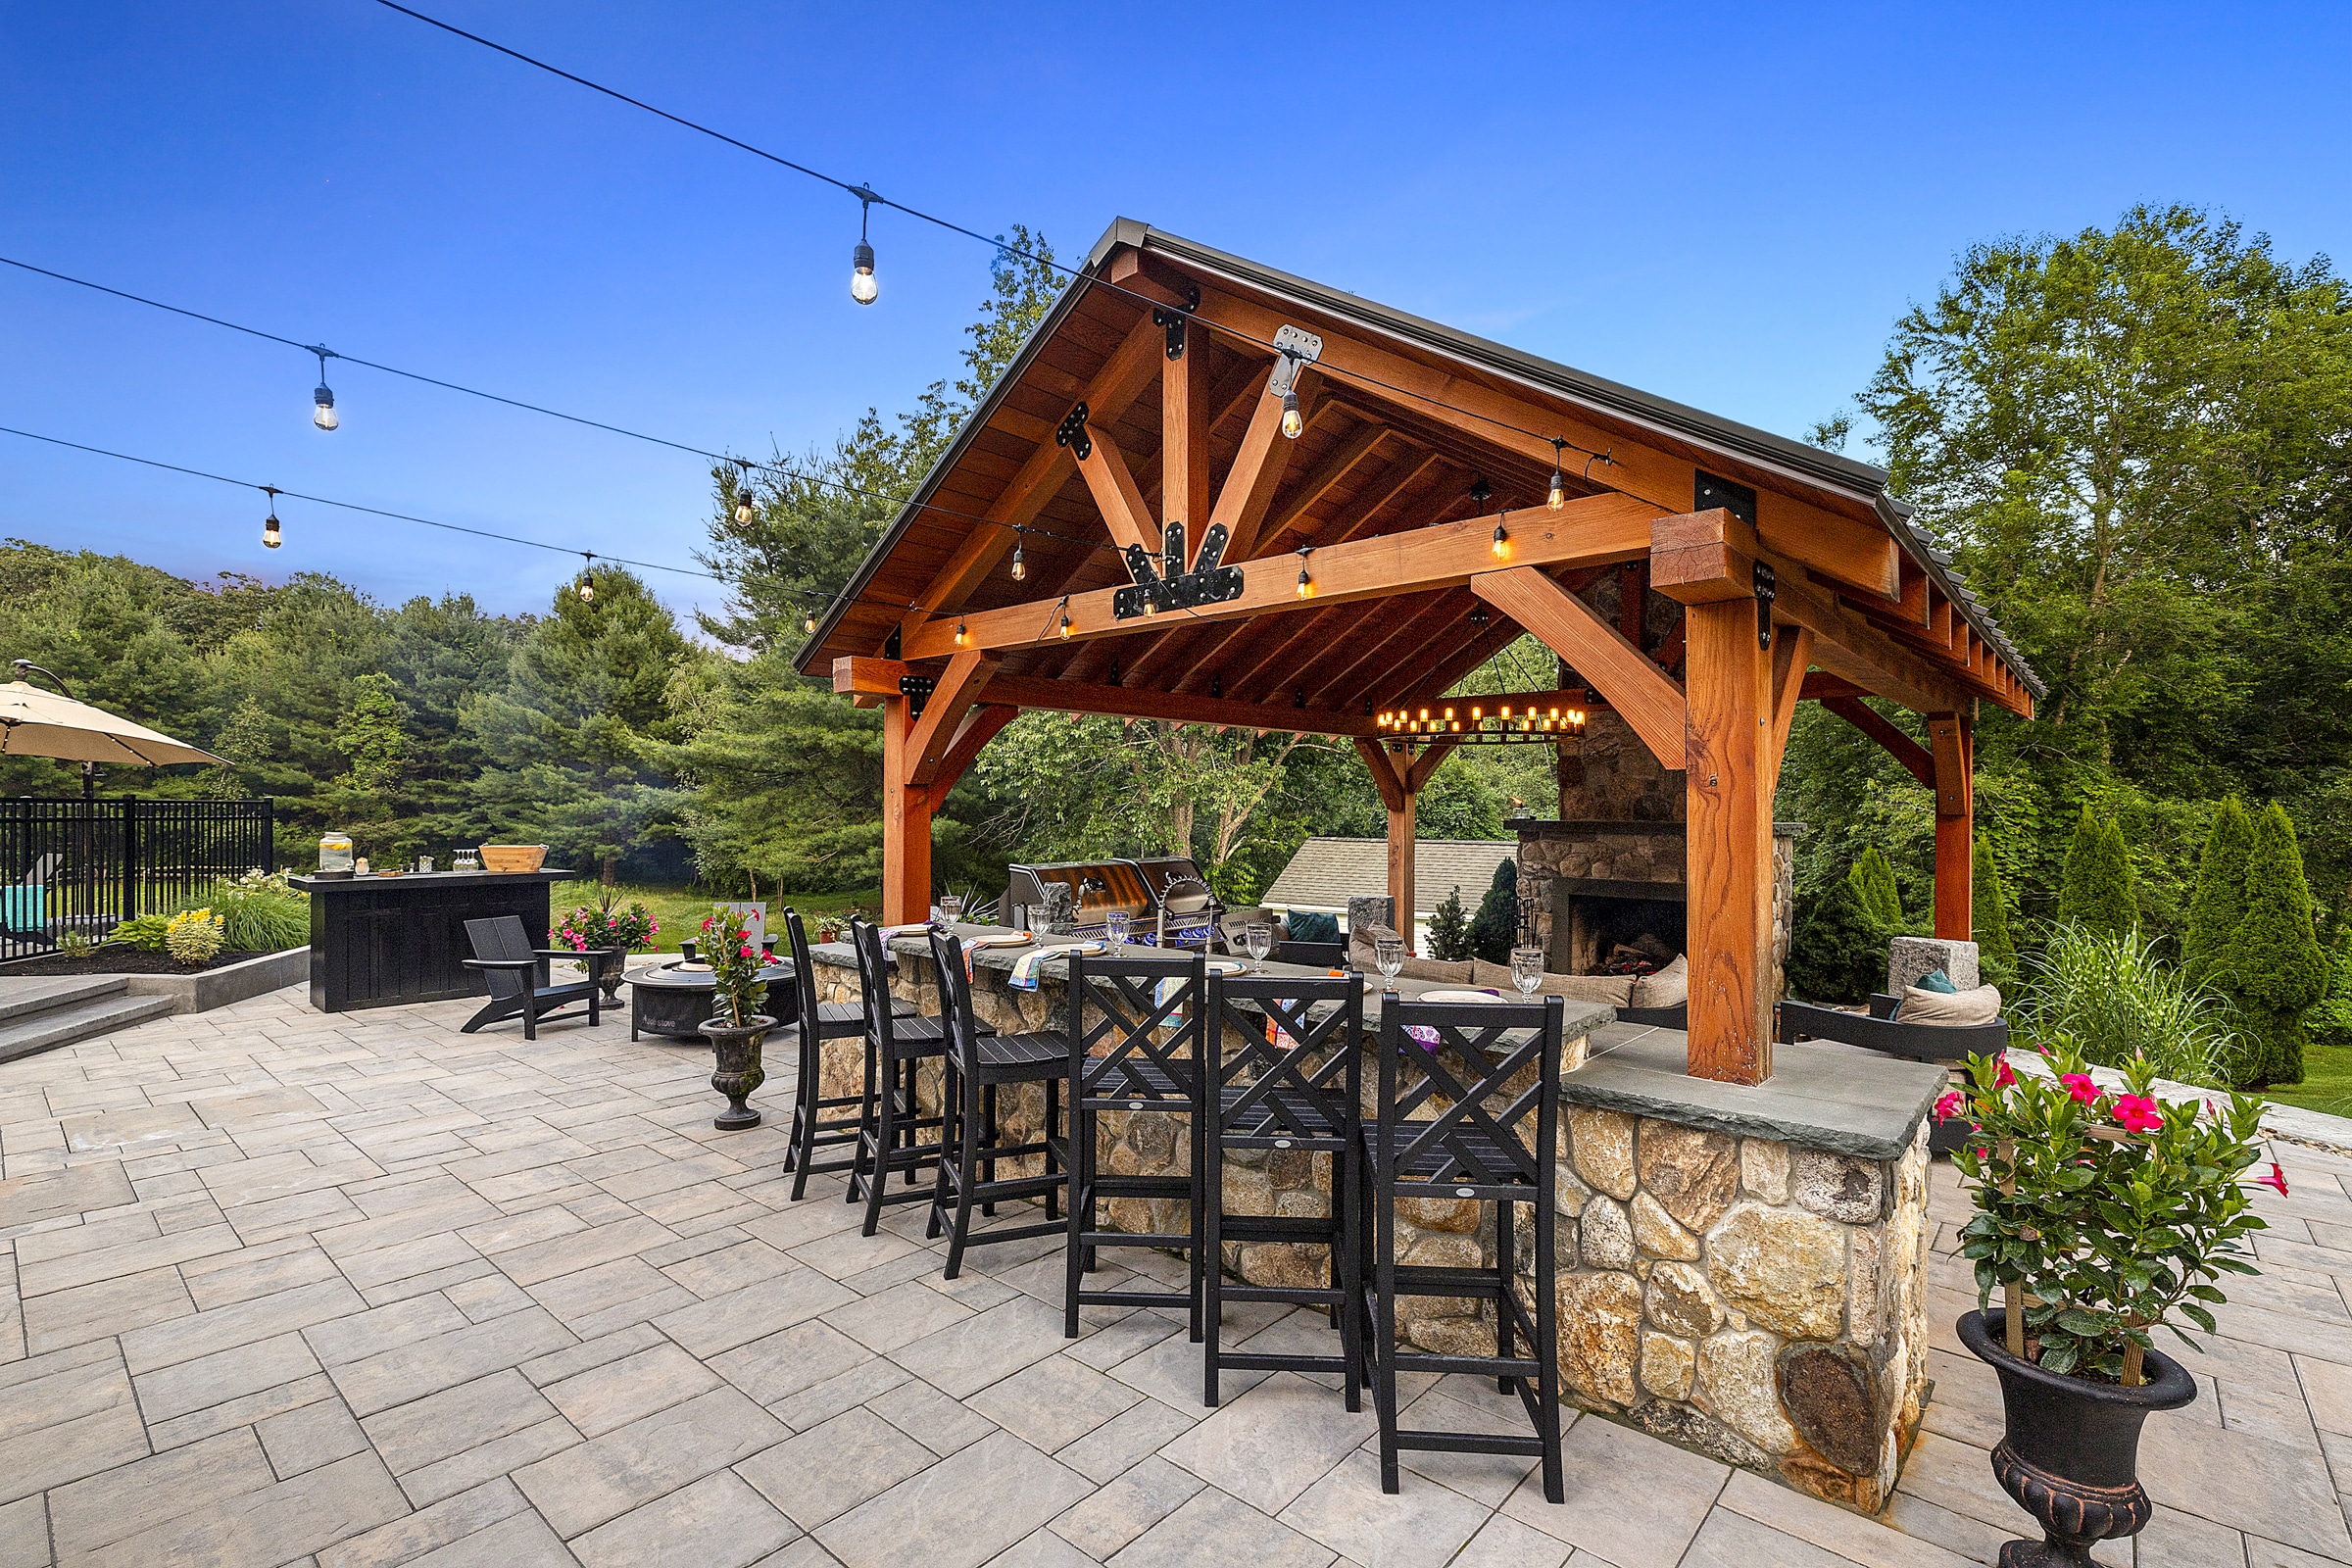 The client built pergola rests on an expansive patio built from Unilock Beacon Hill Flagstone Pavers with Almond Grove coloration. The outdoor dining bar was adorned with New England Rounds stone veneer.